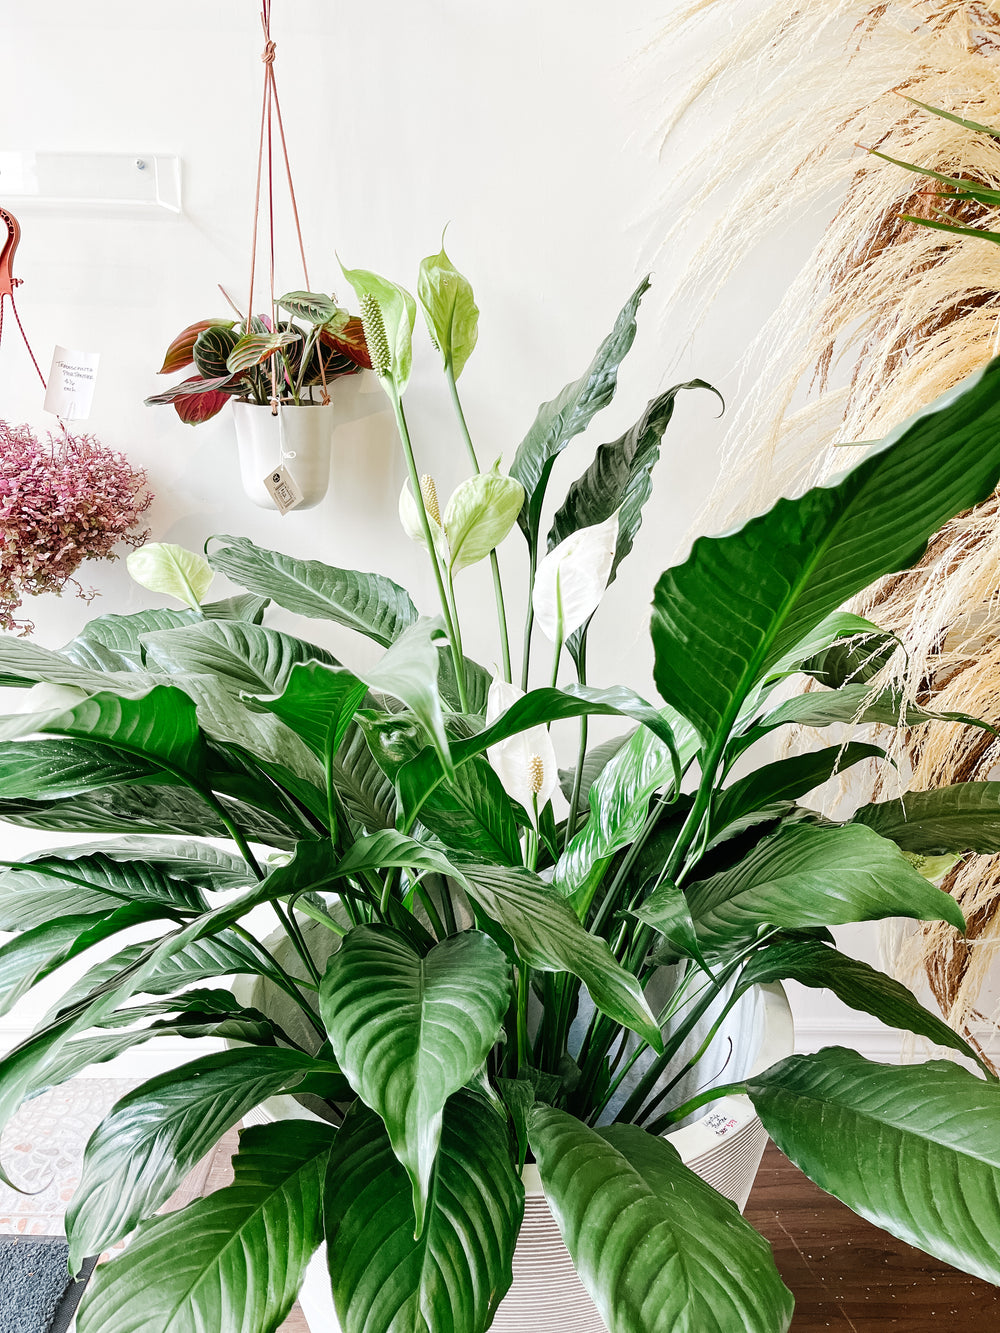 10” Peace Lily Sweet Pablo| Spathiphyllum